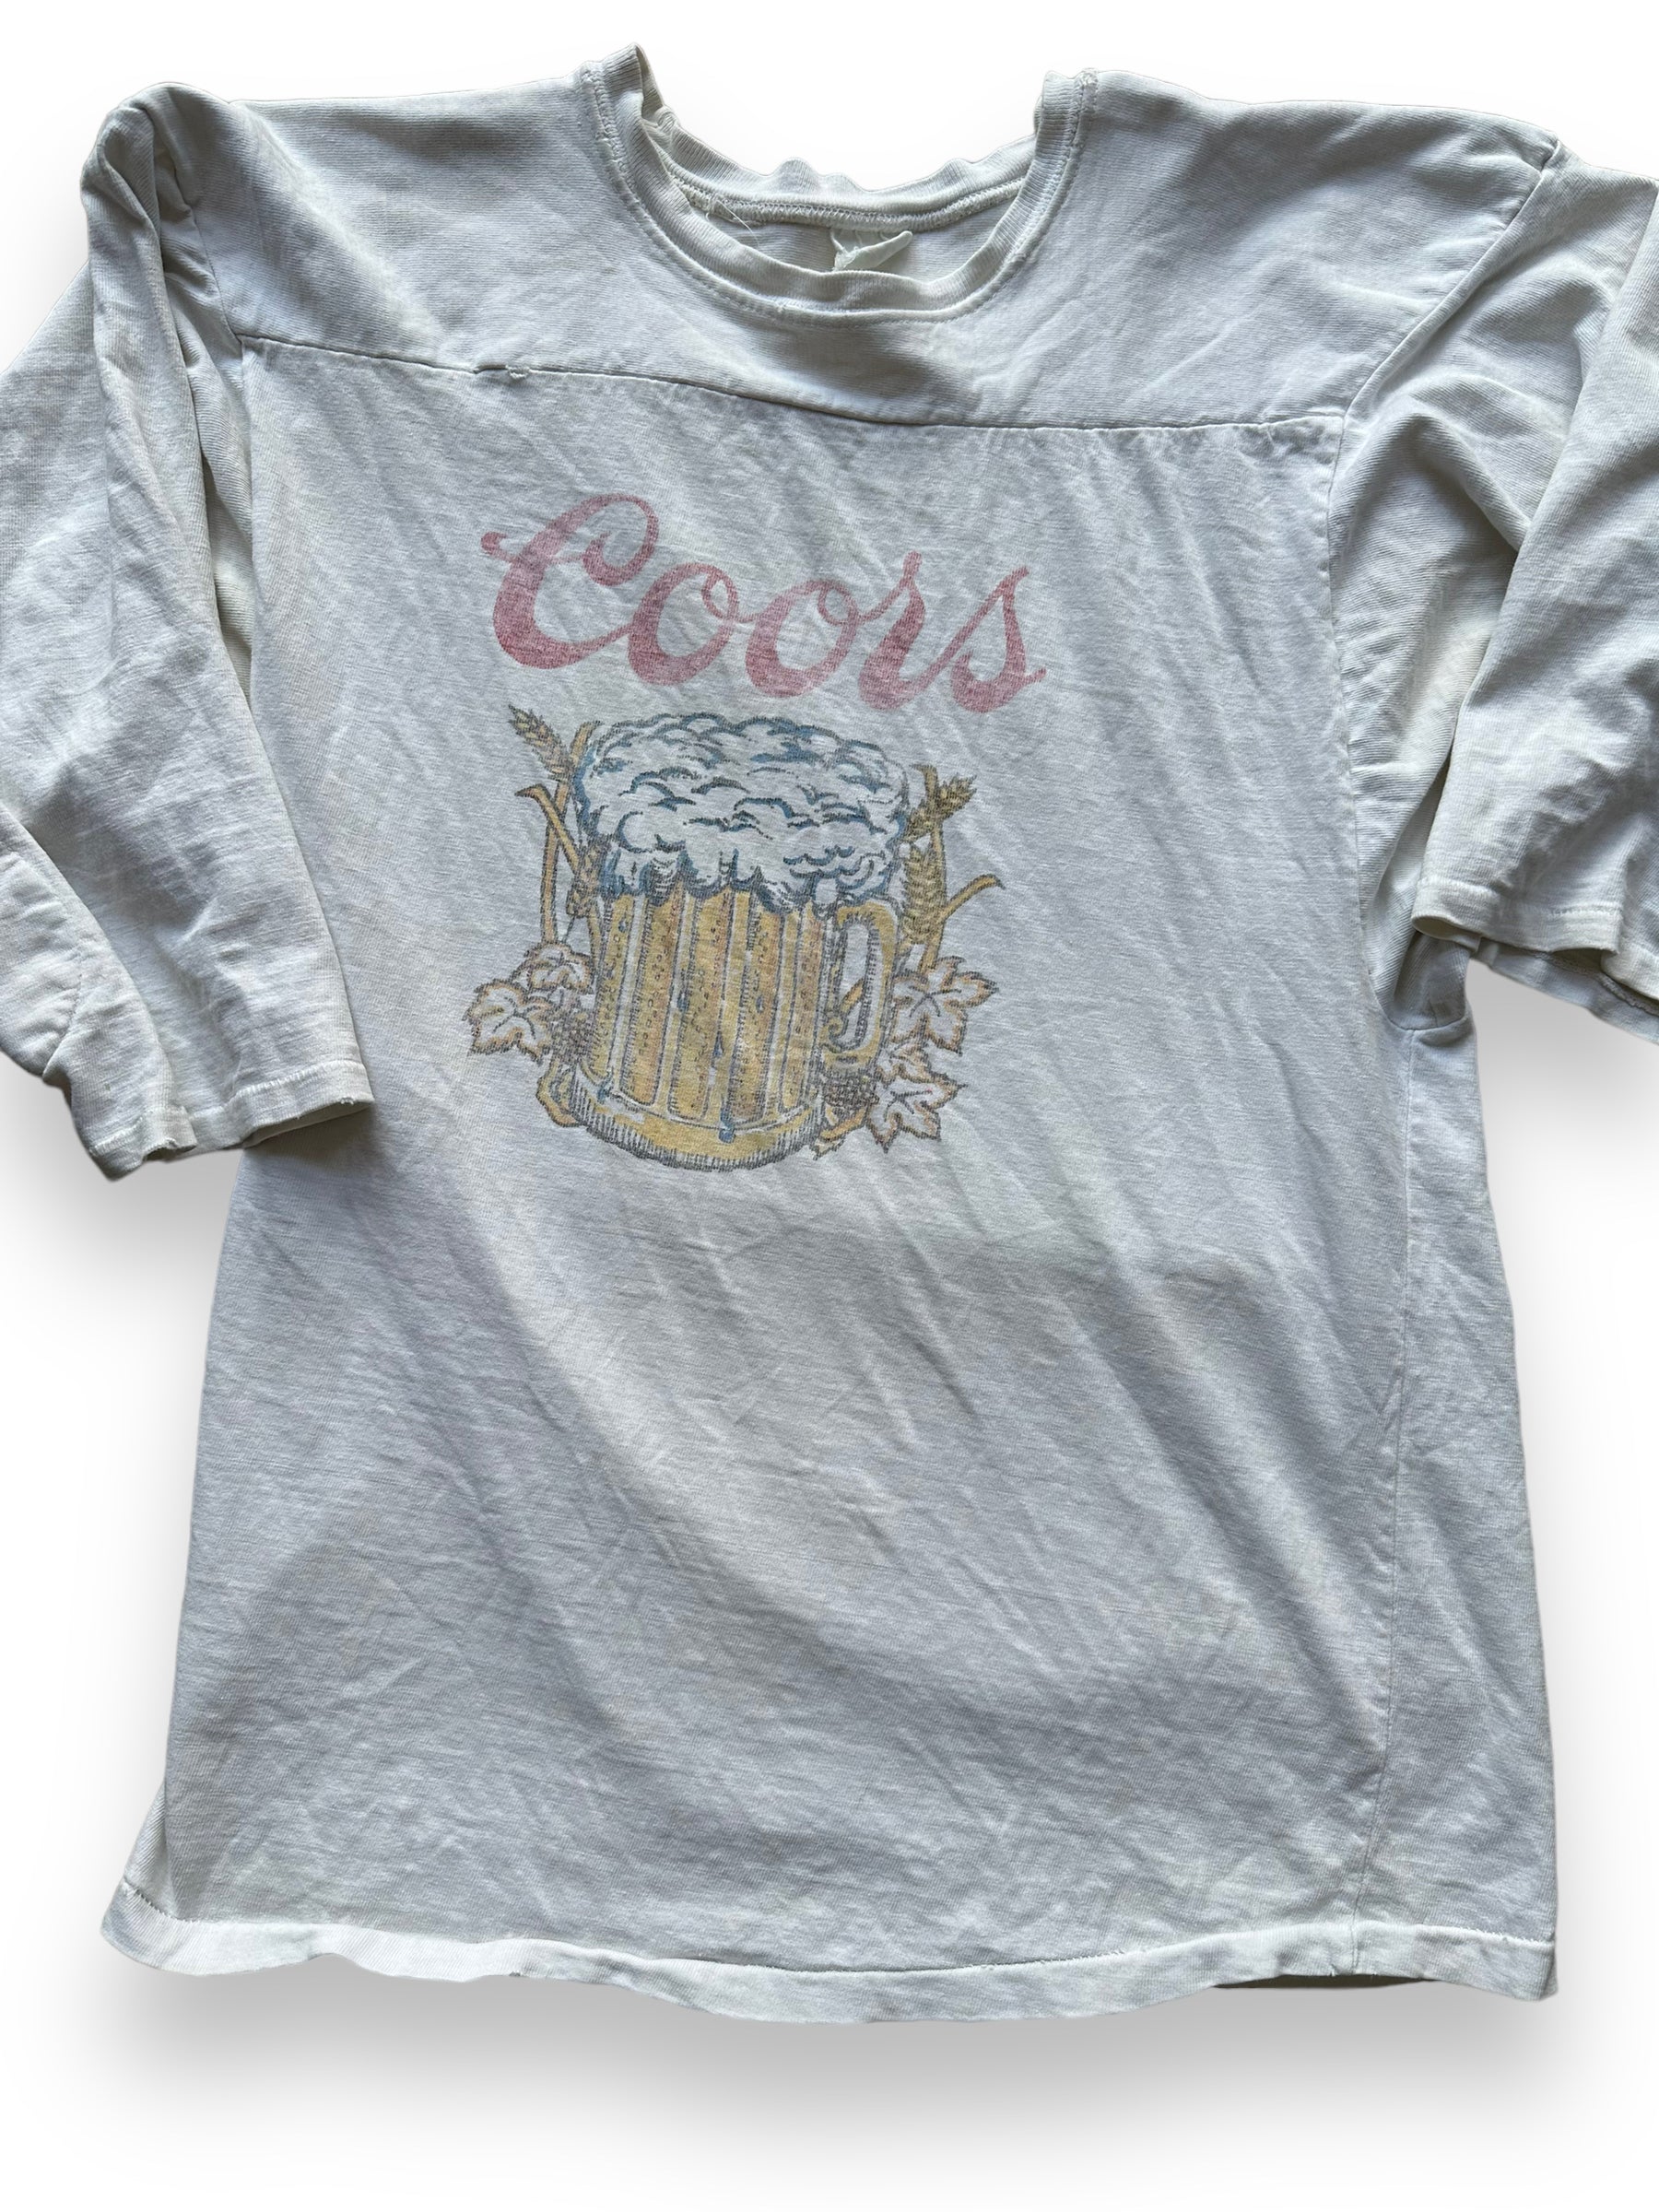 Front Detail on Vintage Coors Jersey Tee SZ M | Vintage Beer T-Shirts Seattle | Barn Owl Vintage Tees Seattle